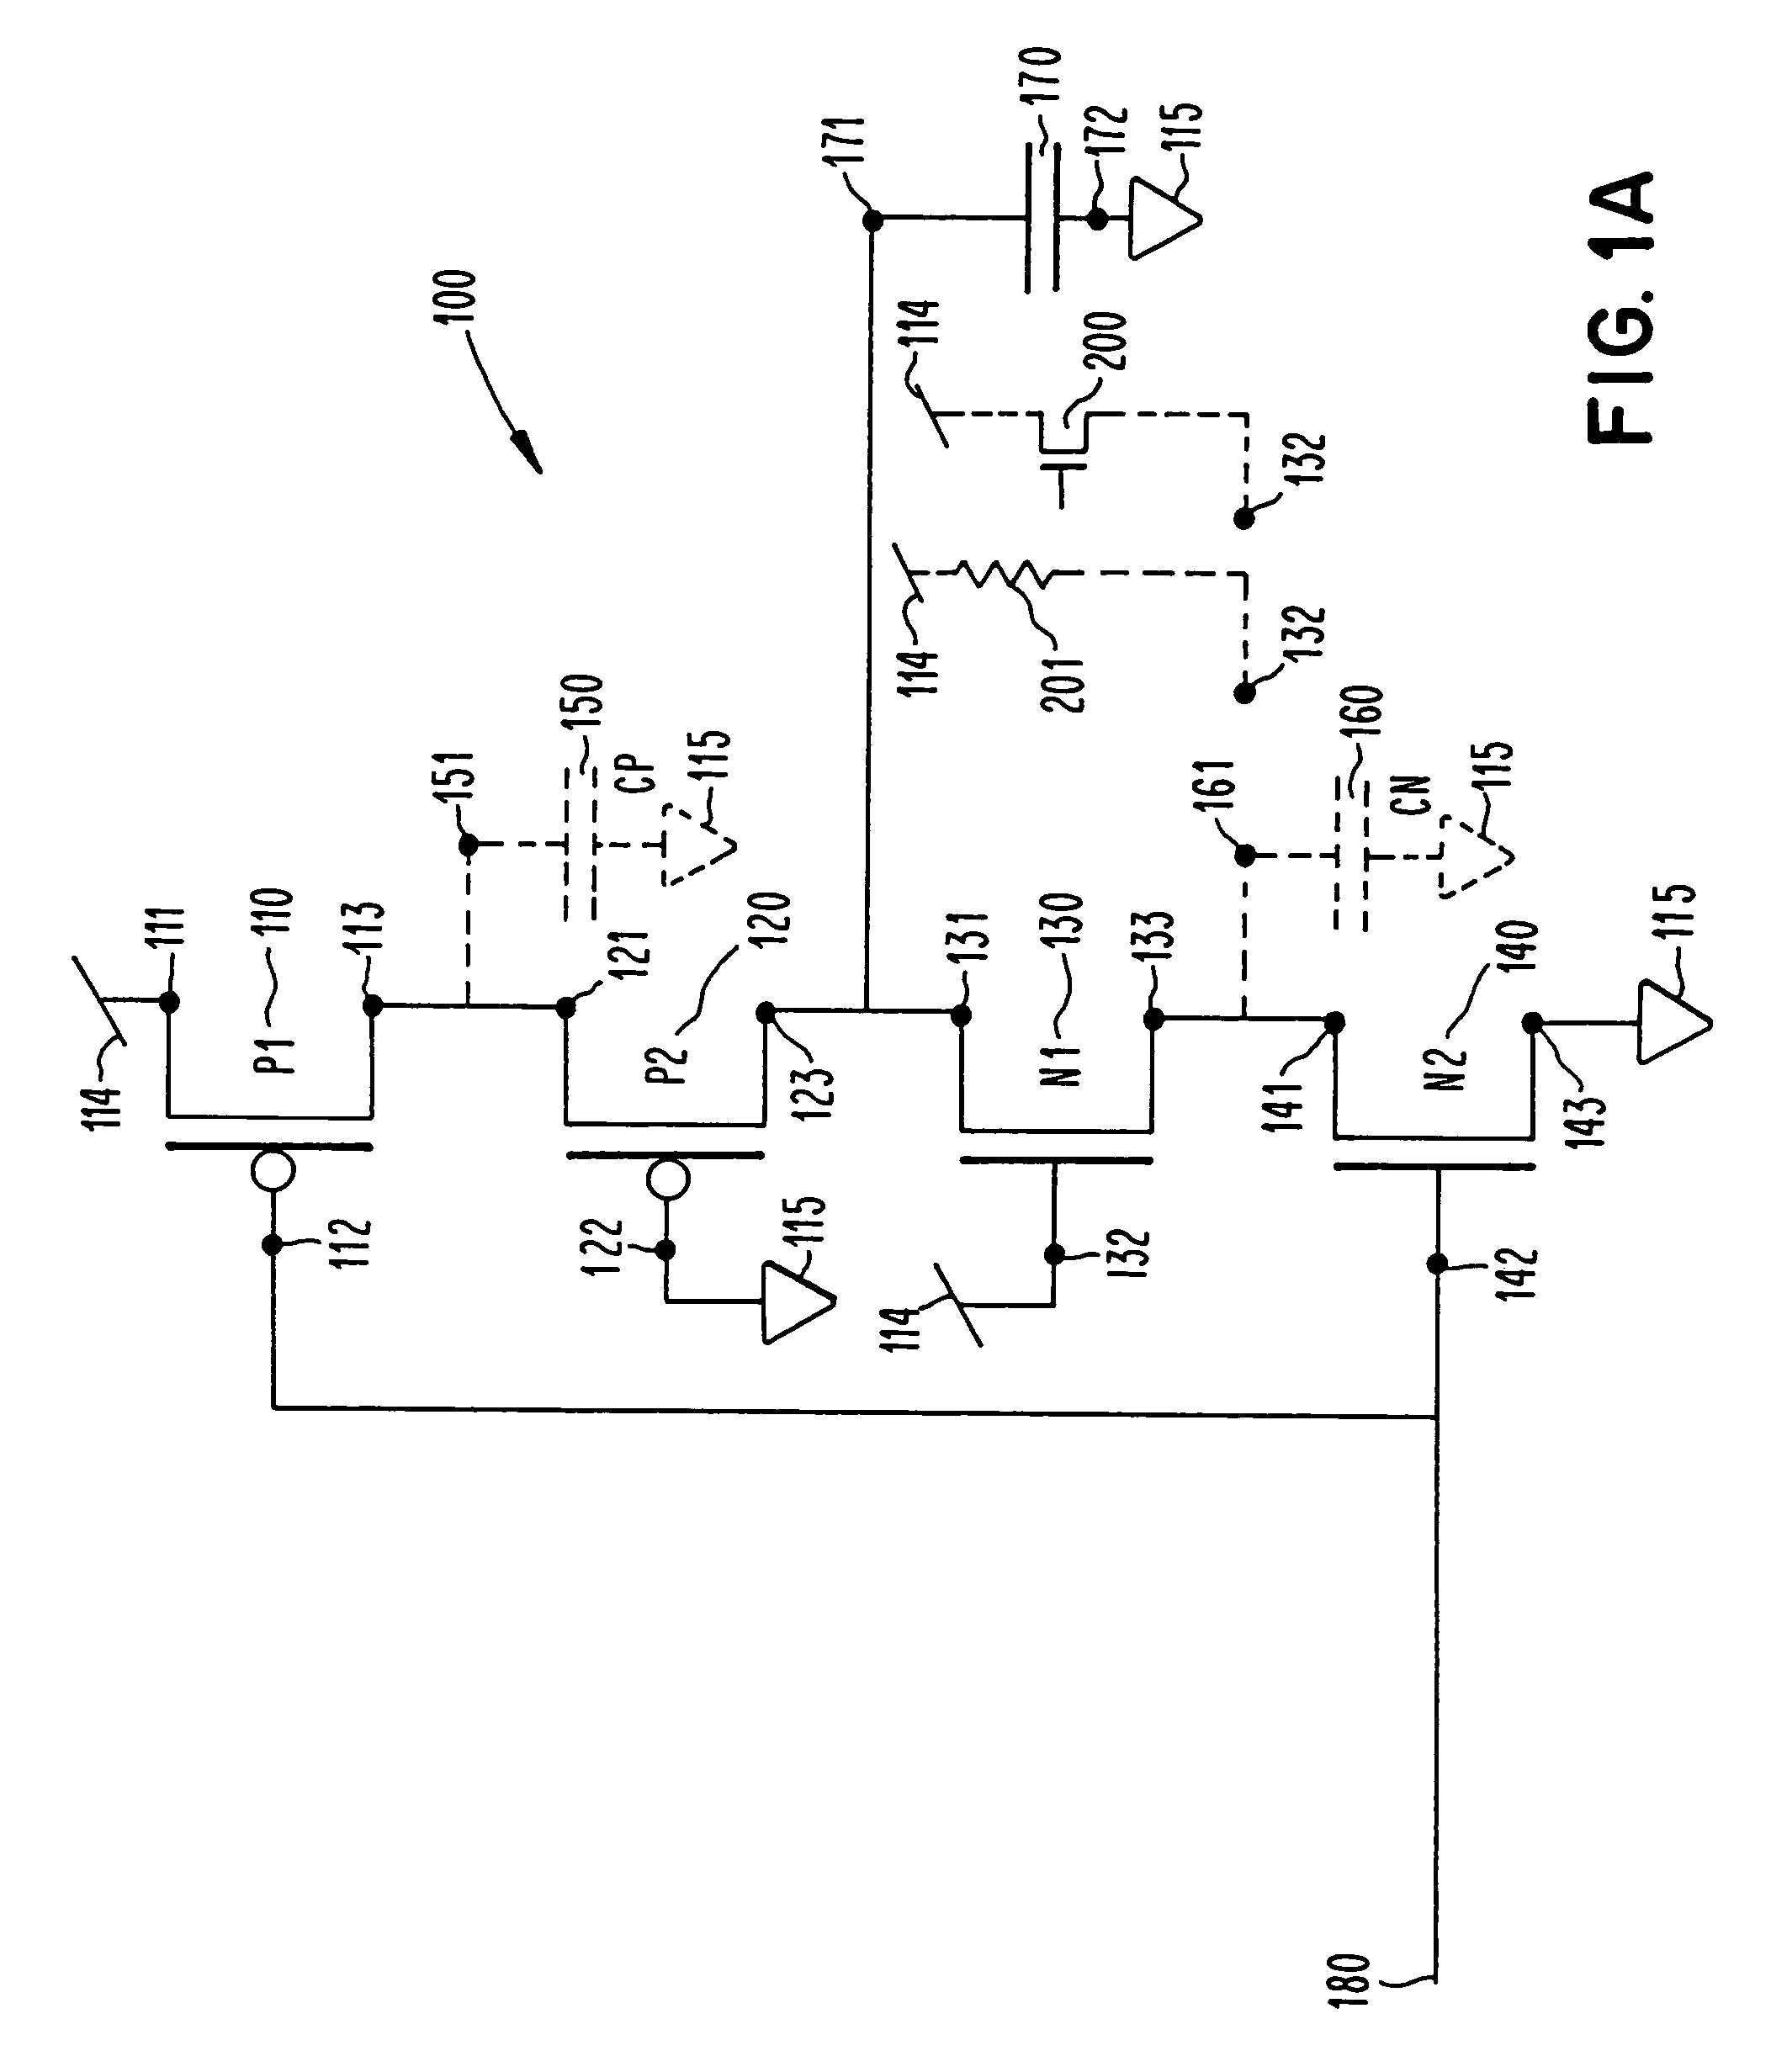 Cascode signal driver with low harmonic content